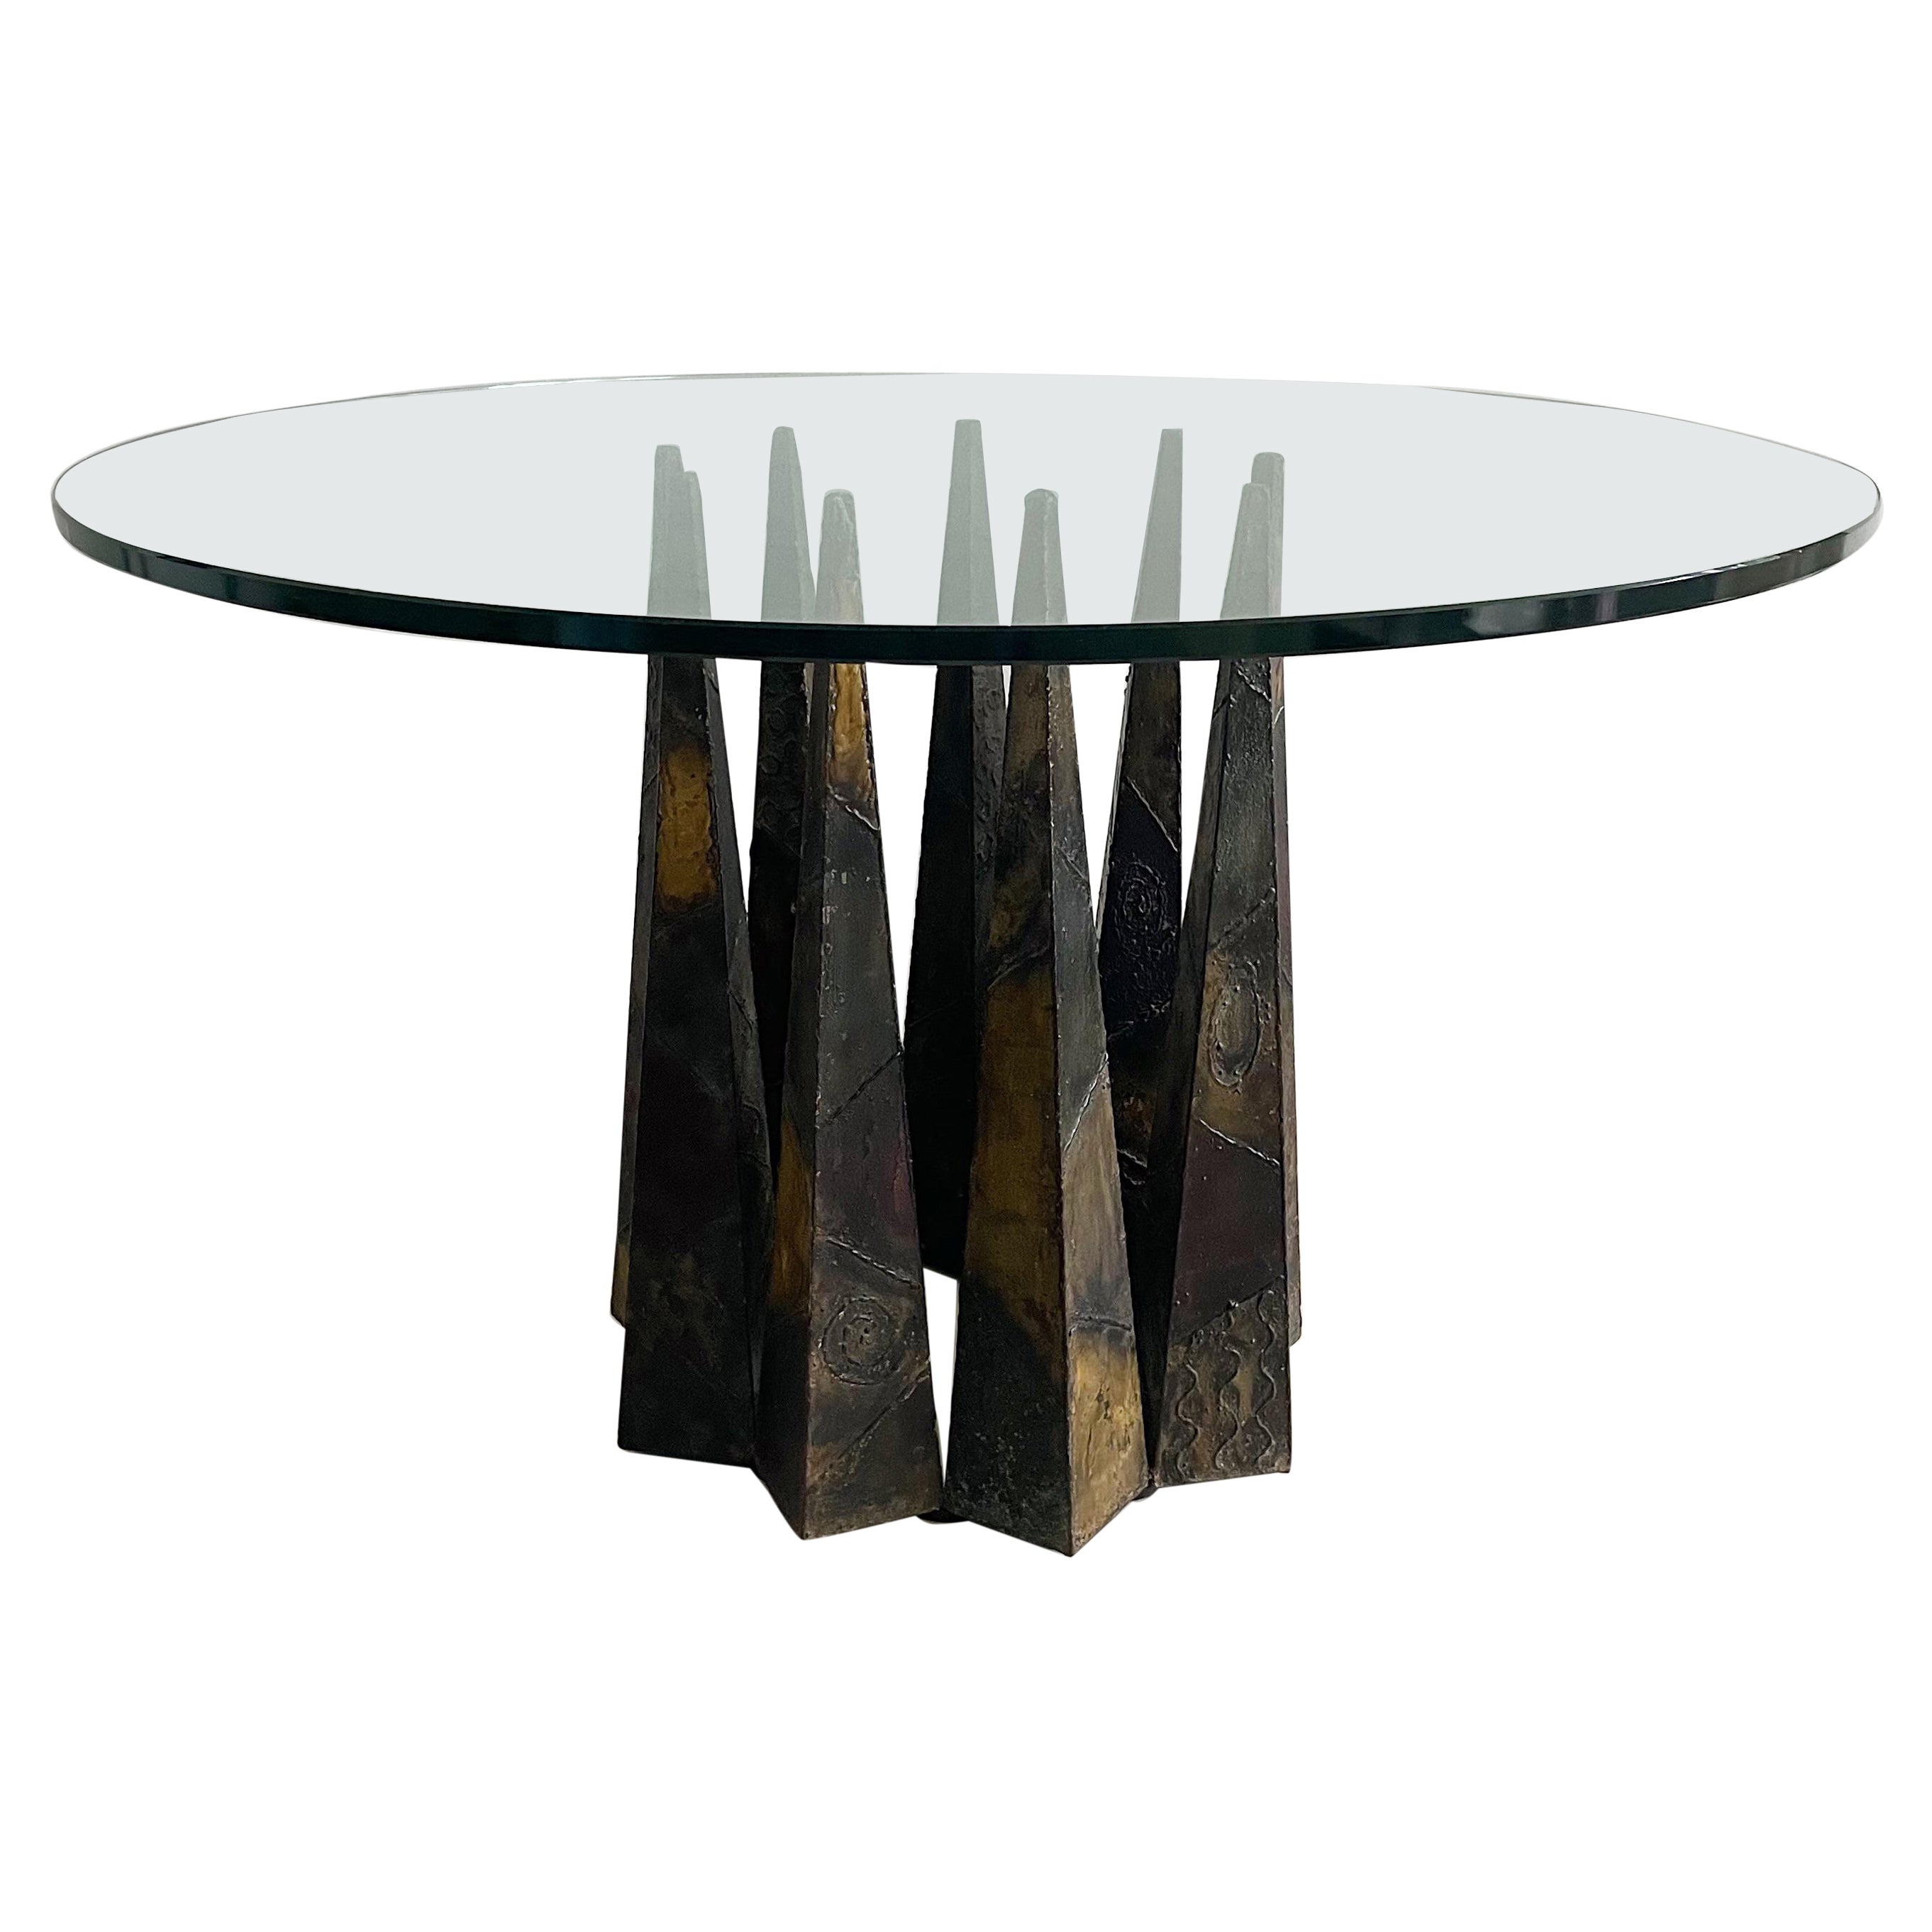 Rare Circular Paul Evans Welded and Patinated Steel Dining Table for Directional For Sale